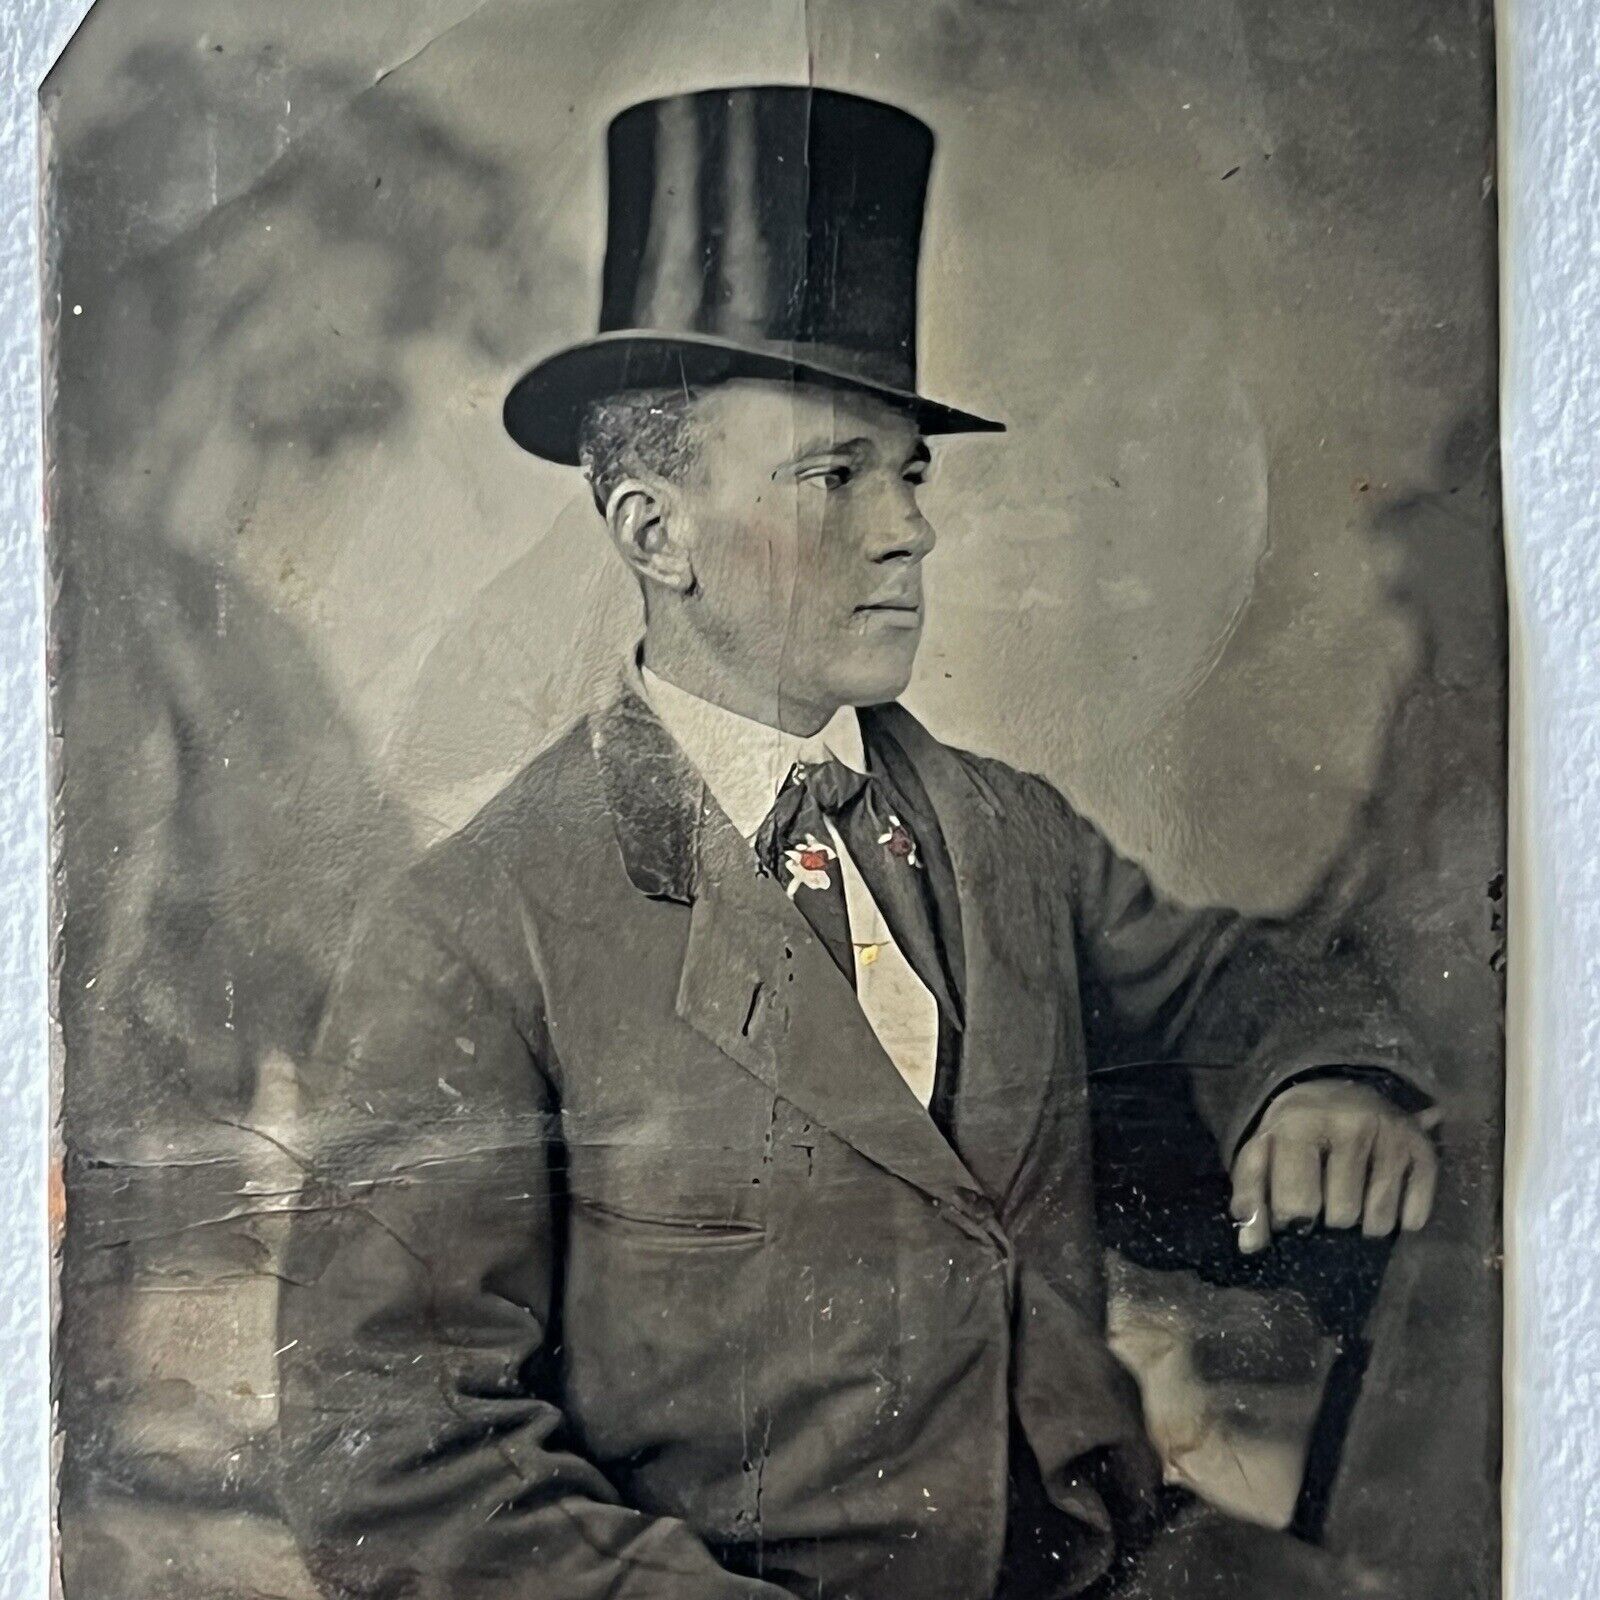 Antique Tintype Photograph Very Handsome Young Man Top Hat Americana